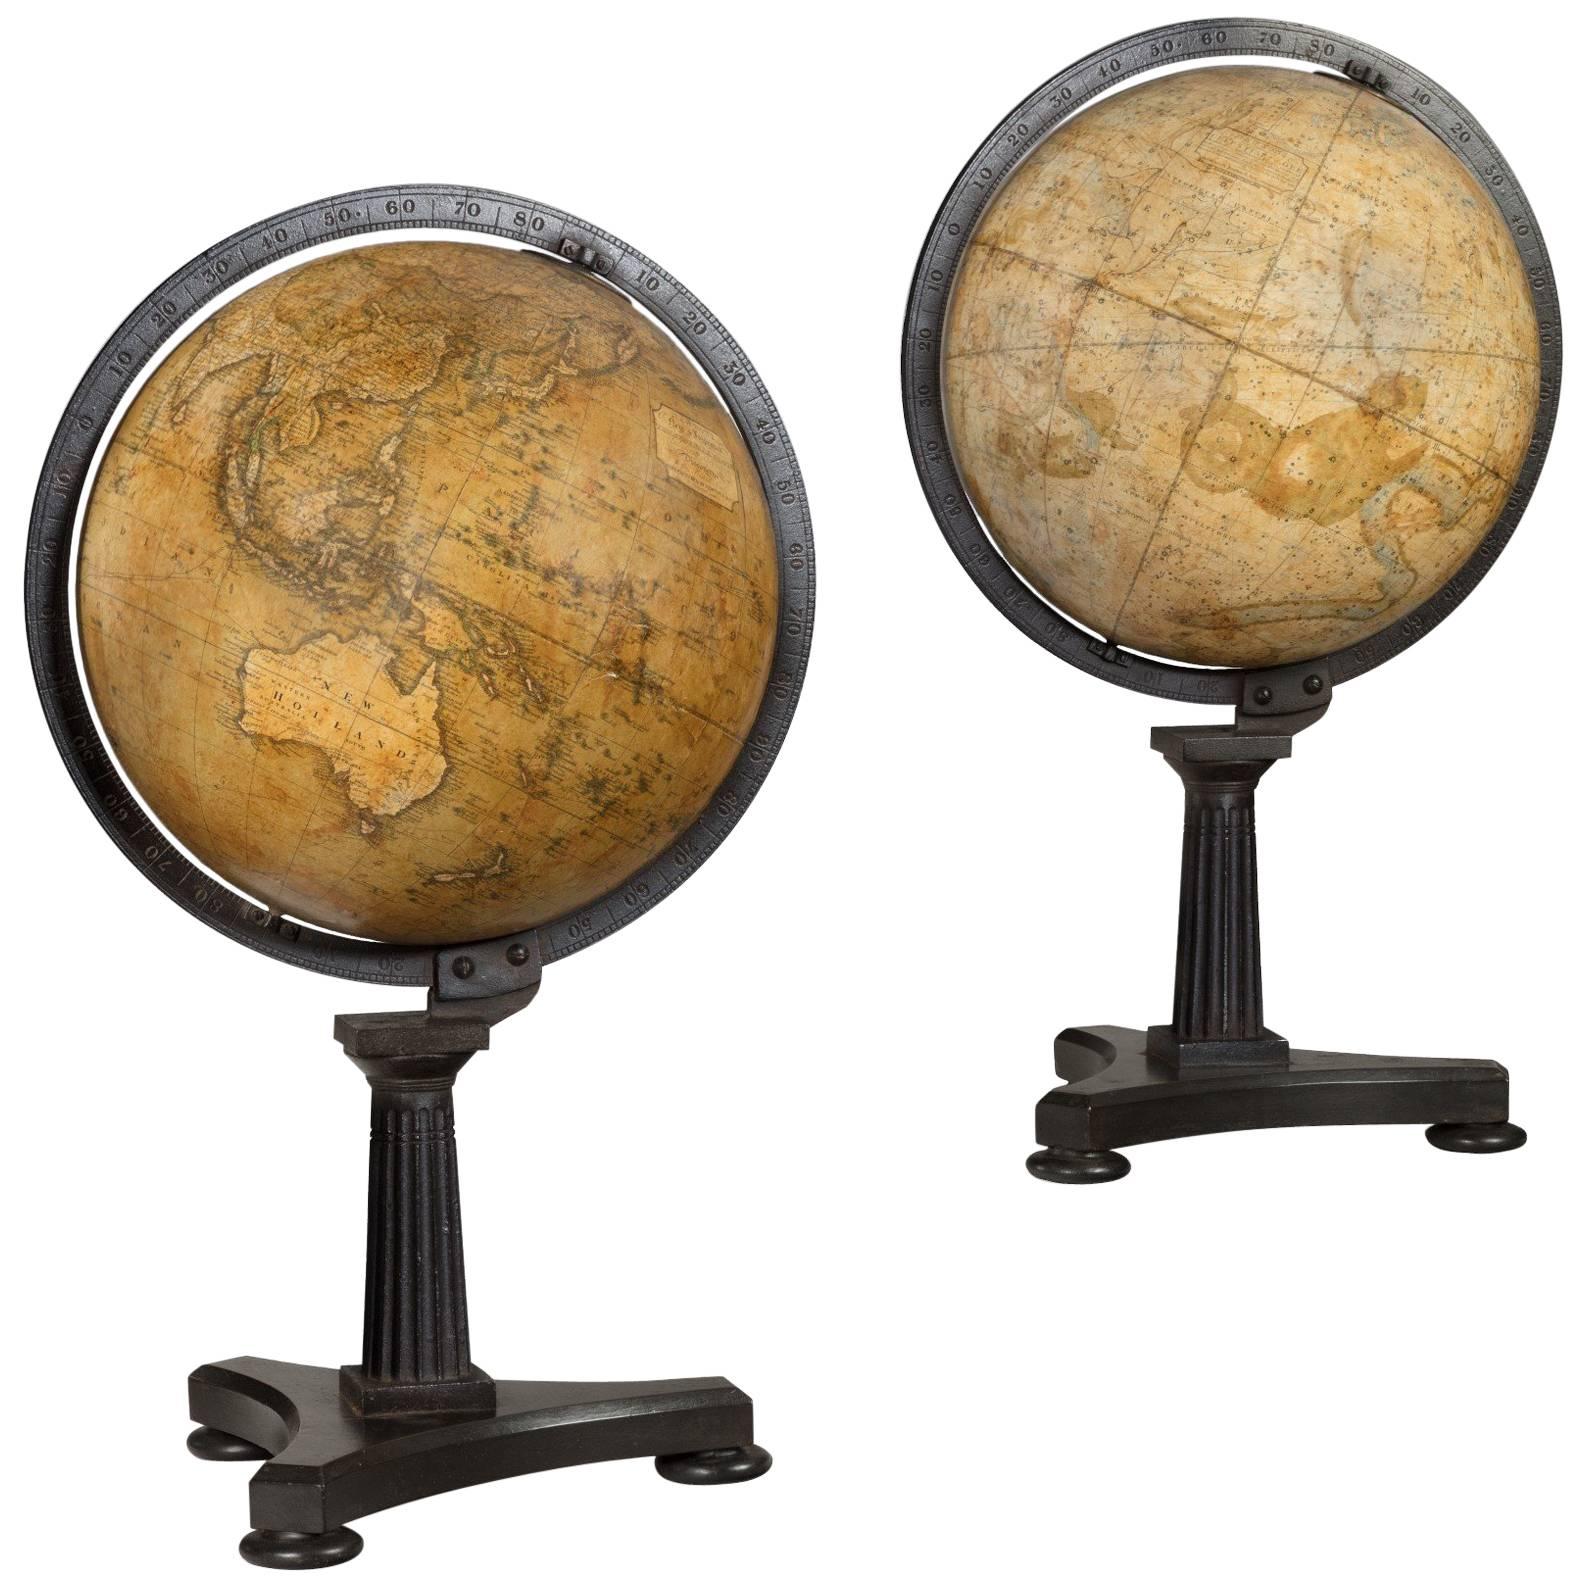 Pair of Antique Desk Globes by Newton